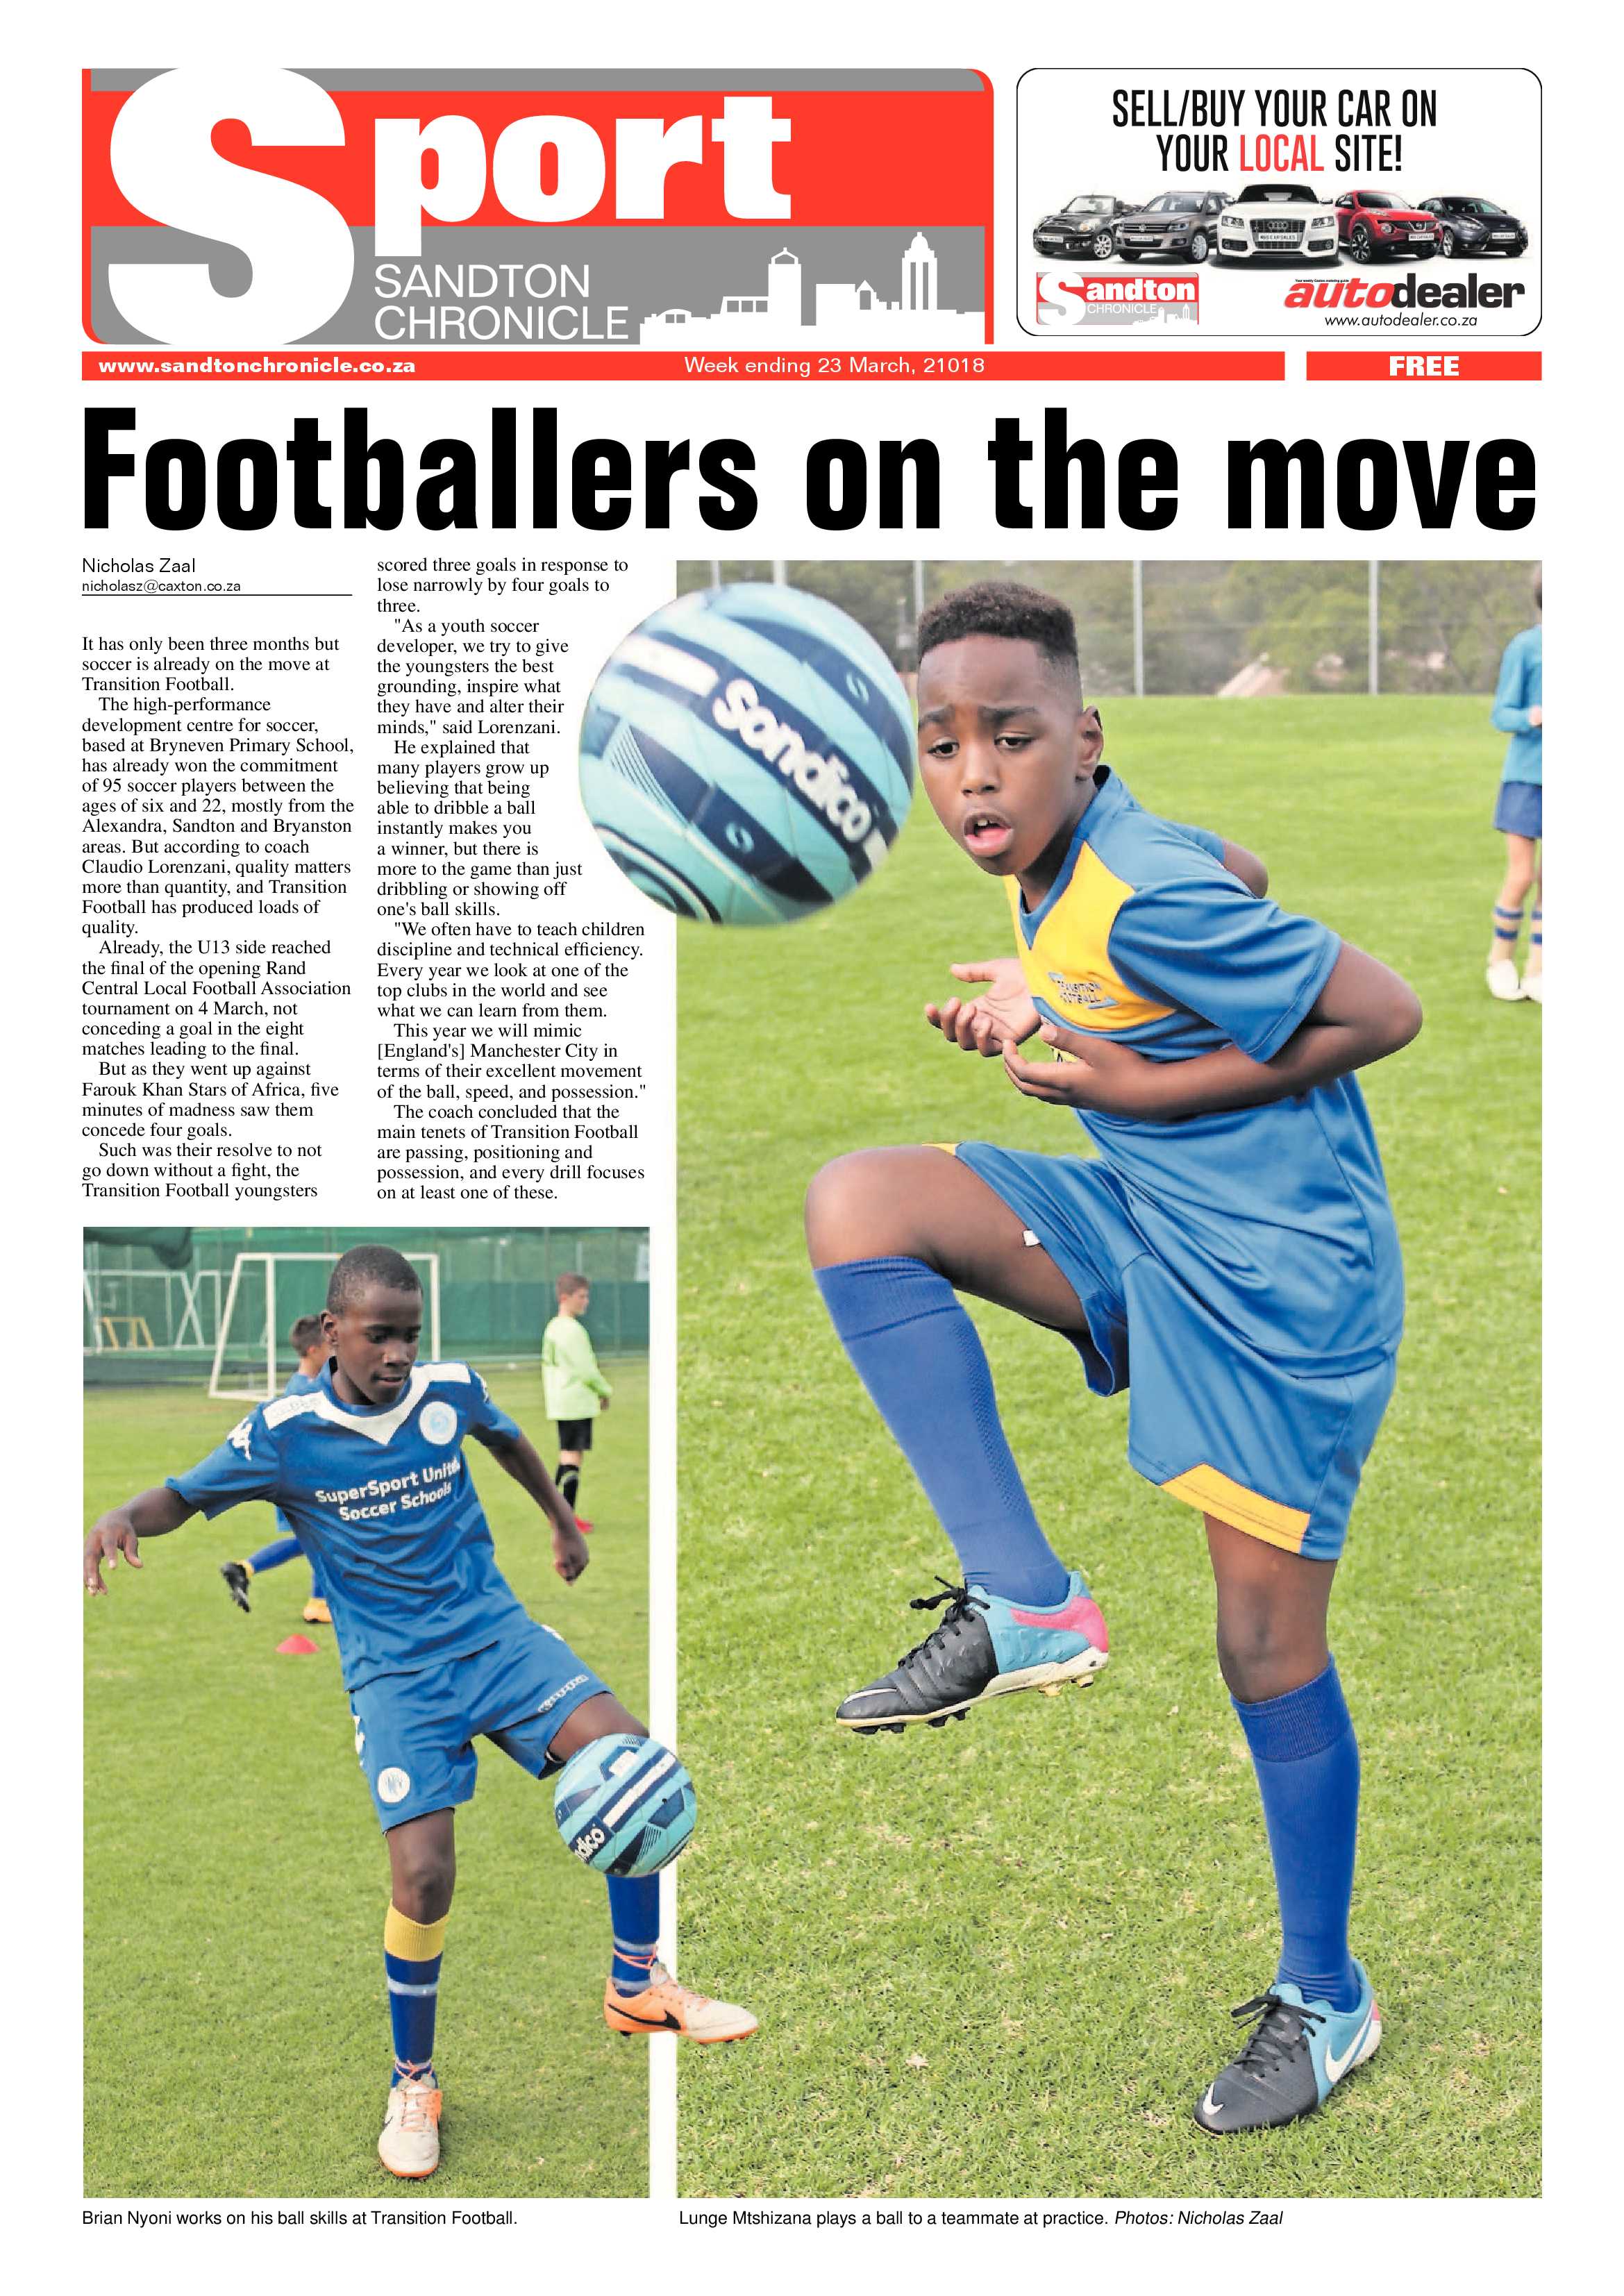 Sandton Chronicle 23 March 2018 page 24